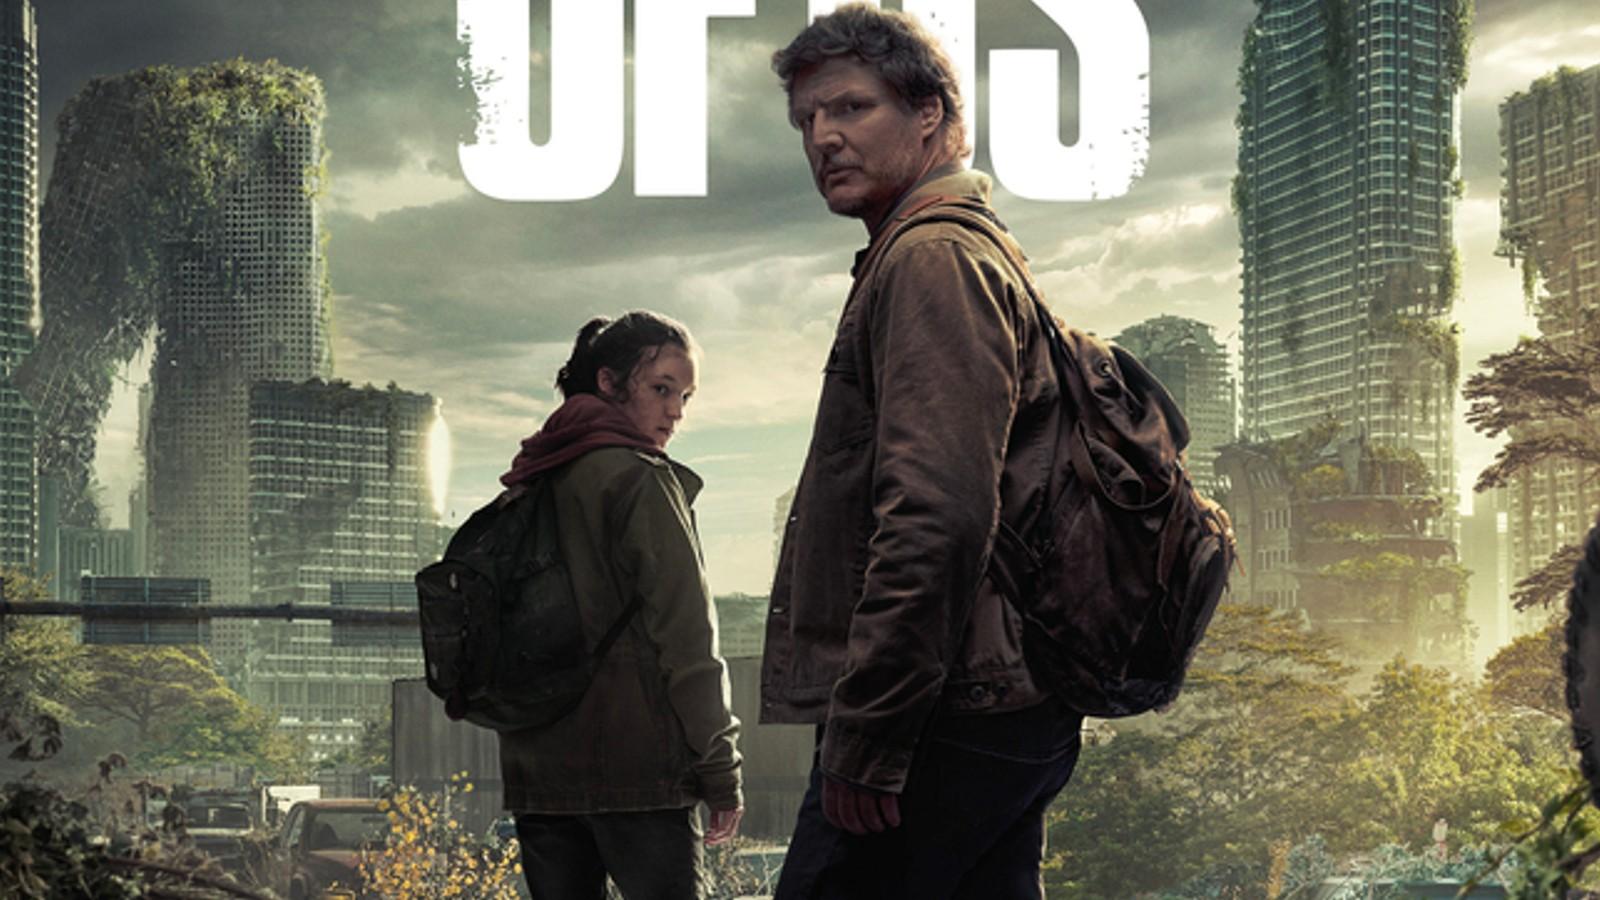 The Last of Us Part II, Music From (PS4) (2020) MP3 - Download The Last of Us  Part II, Music From (PS4) (2020) Soundtracks for FREE!